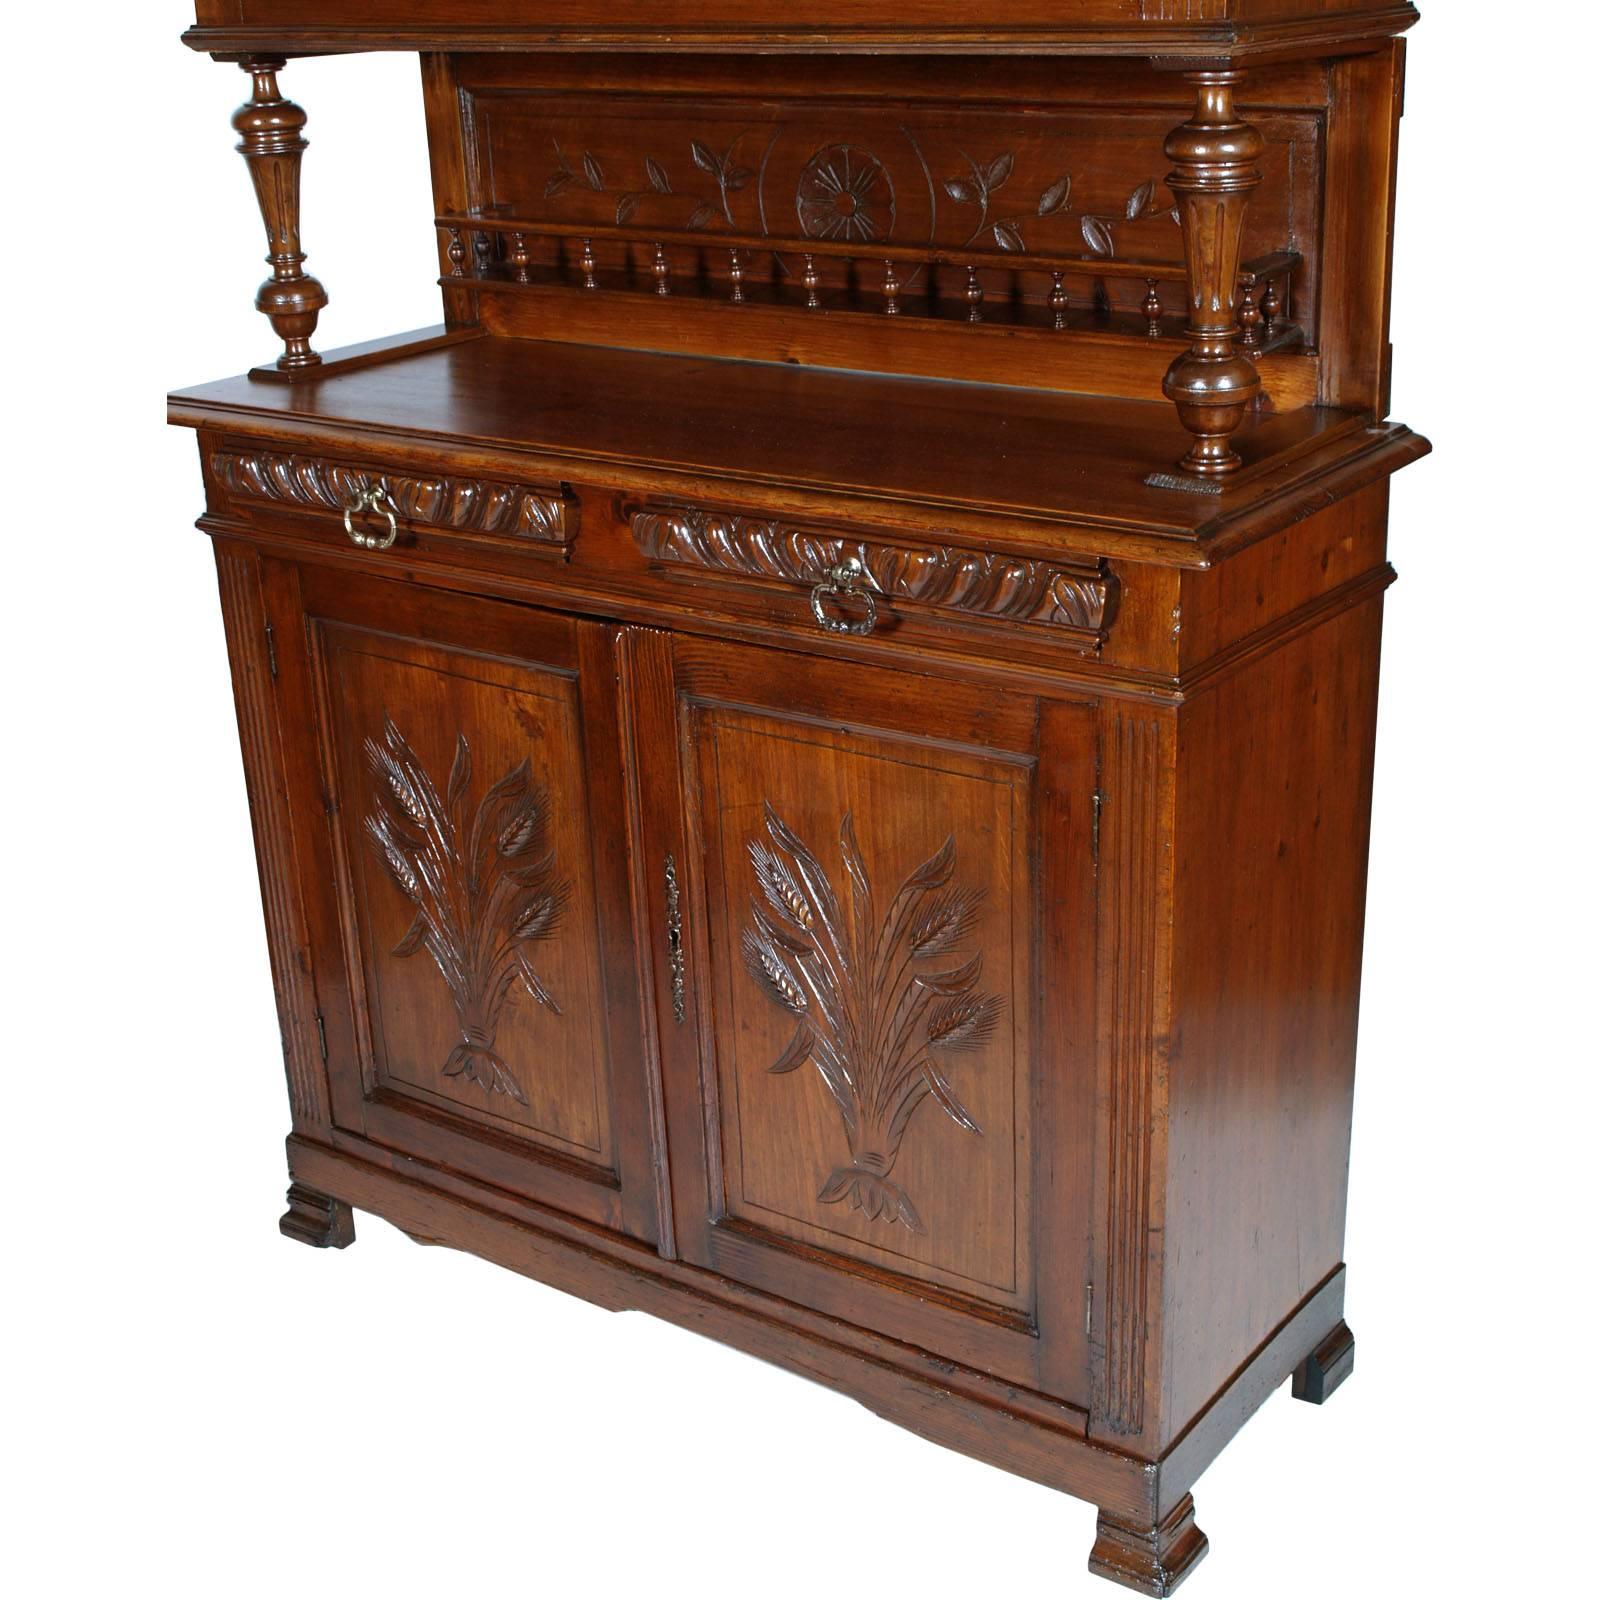 Late 19th century Art Nouveau Provencal credenza cupboard, hand-carved solid wood restored and wax polished

Measure cm: H 100/220 W 120 D 44

Antique precious and elegant two-body sideboard, Provençal origins of the nineteenth century, entirely